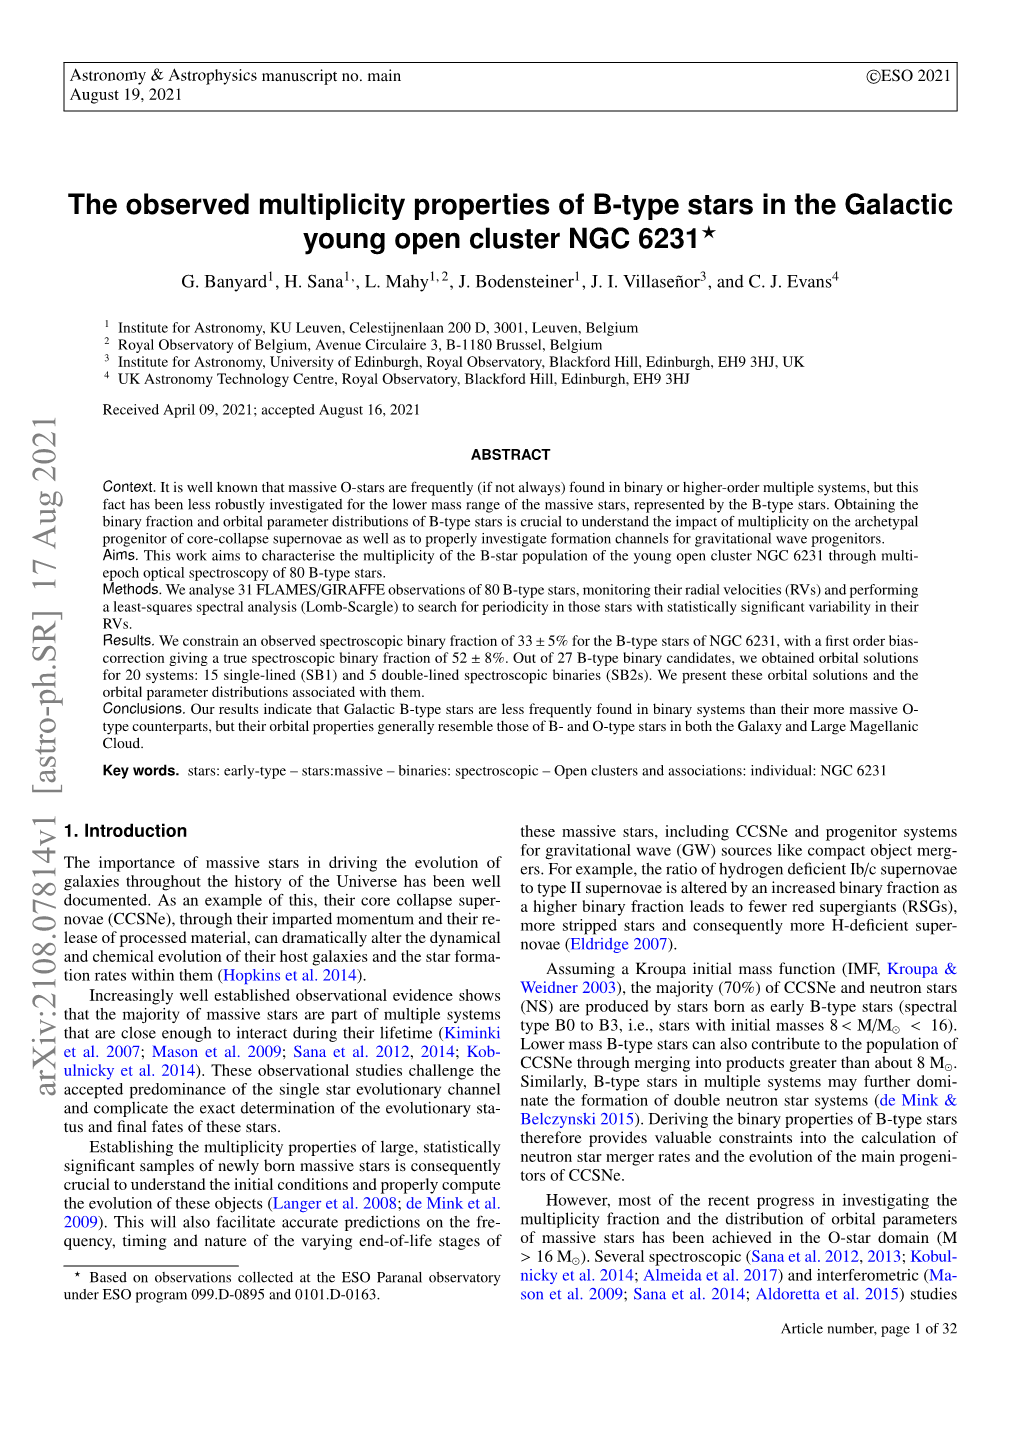 The Observed Multiplicity Properties of B-Type Stars in the Galactic Young Open Cluster NGC 6231? G